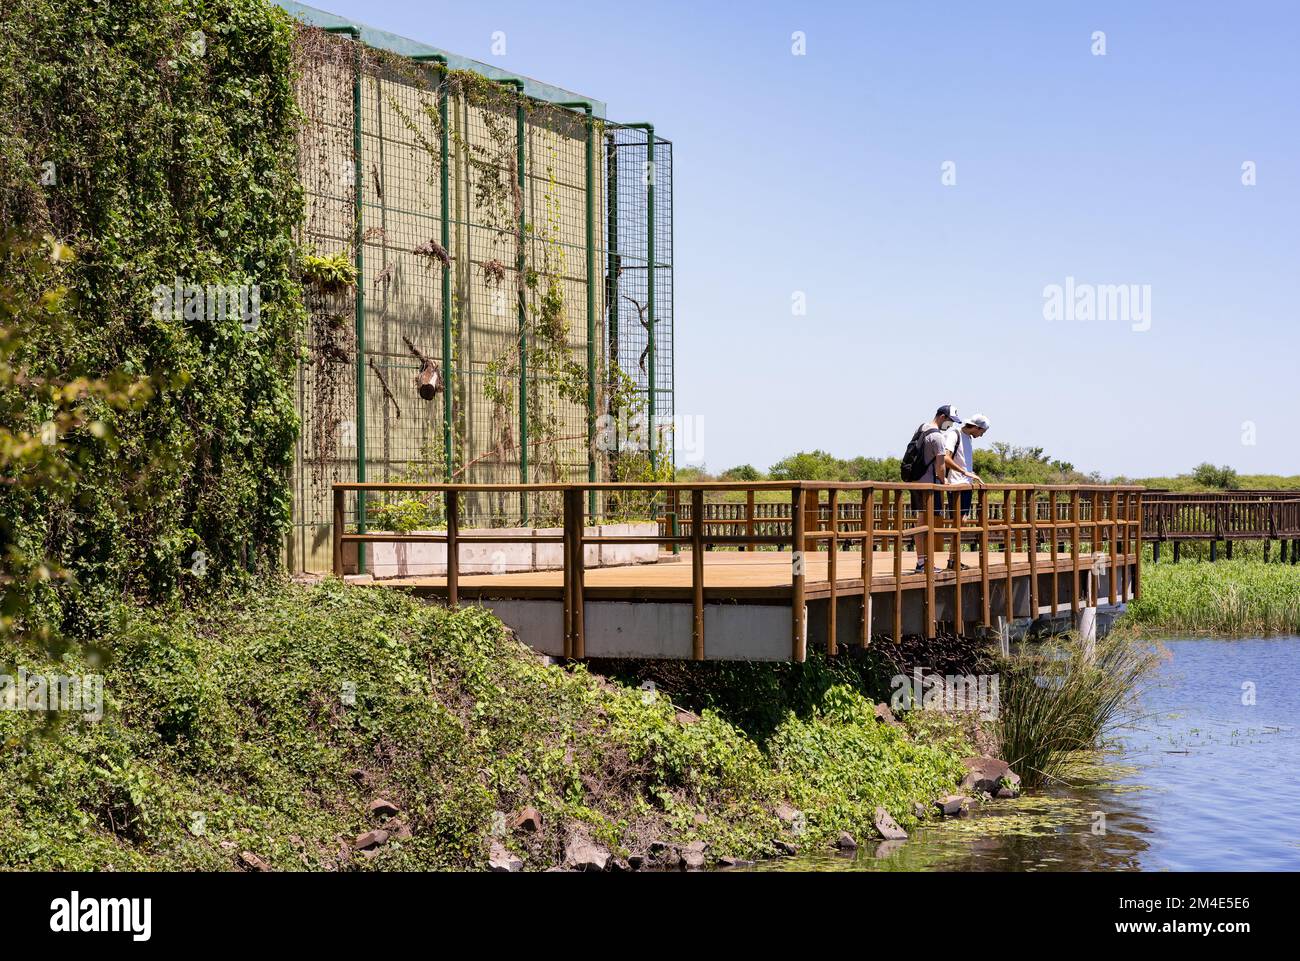 COLONIA CARLOS PELLEGRINI, CORRIENTES, ARGENTINA - NOVEMBER 20, 2021: Two tourists observe the wildlife on the wooden walkway of the center of interpr Stock Photo